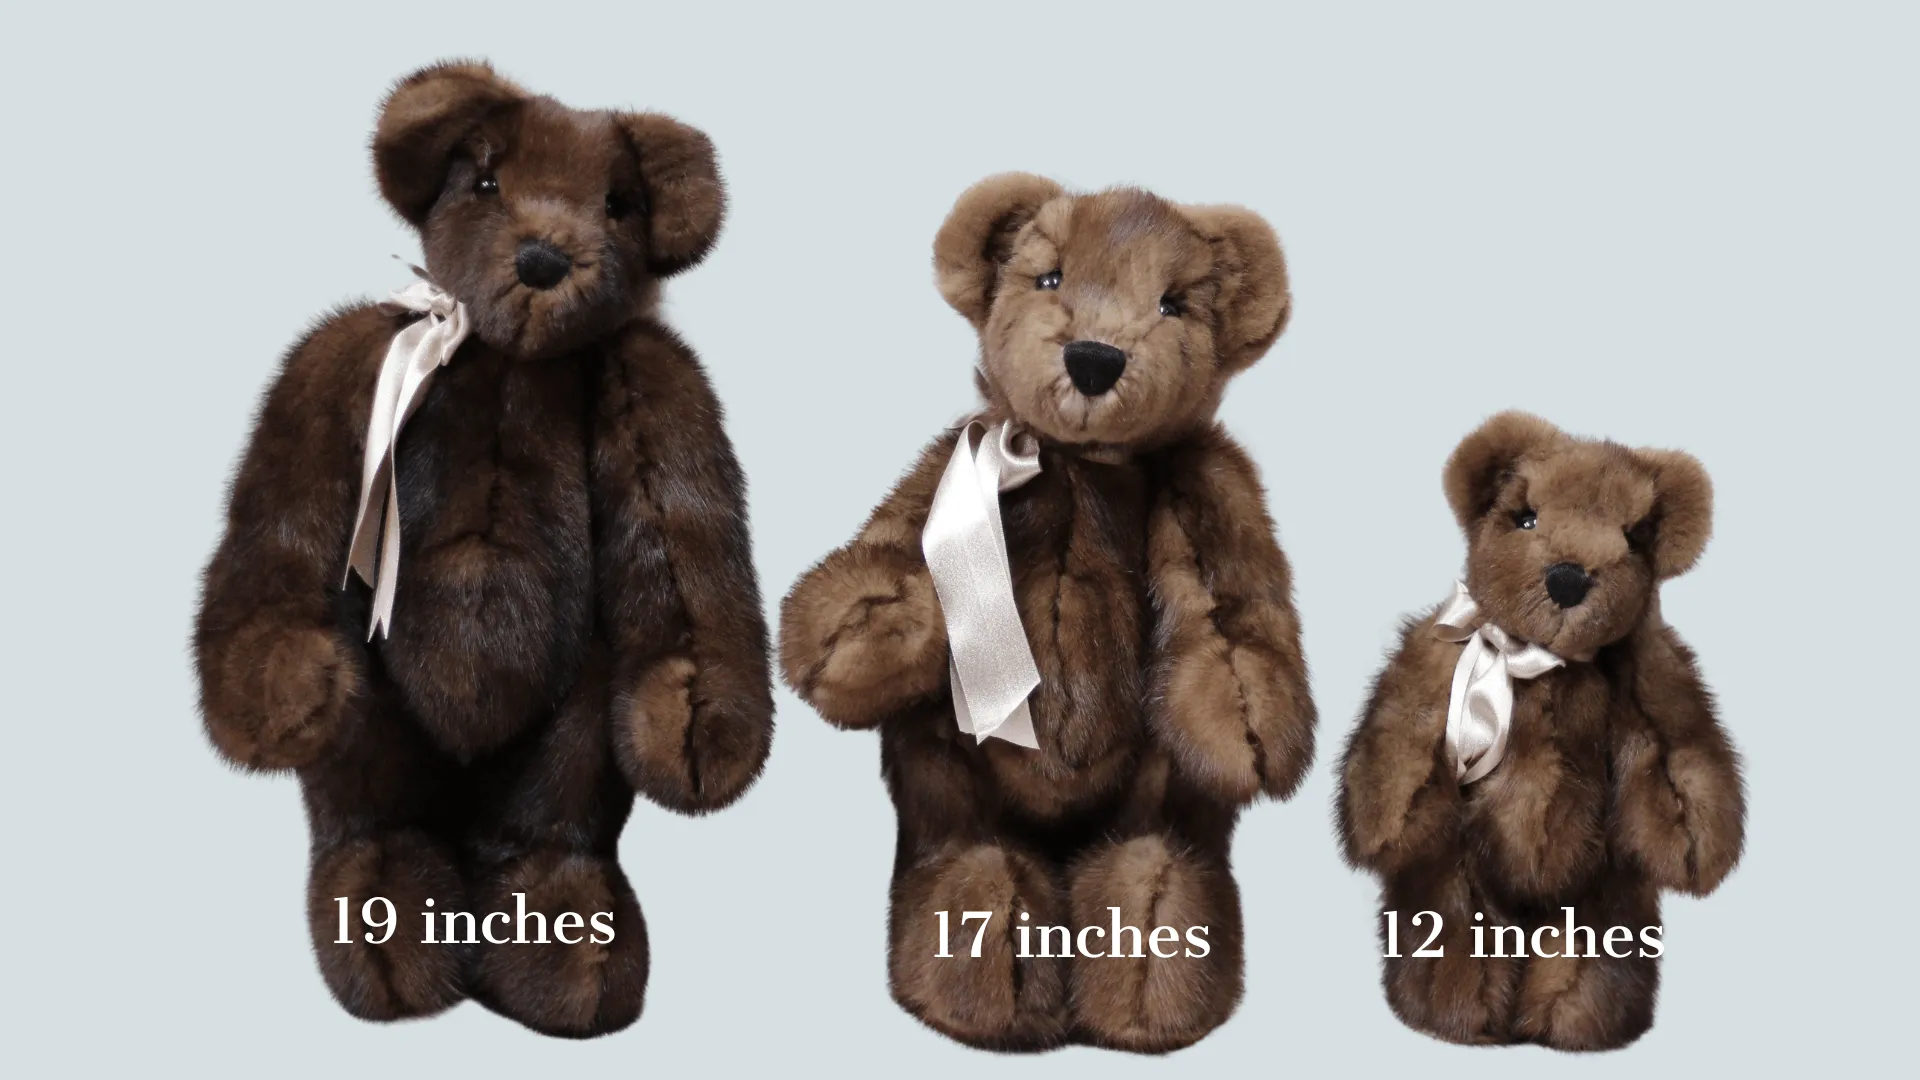 Different-sizes-of-bears-created-comparison